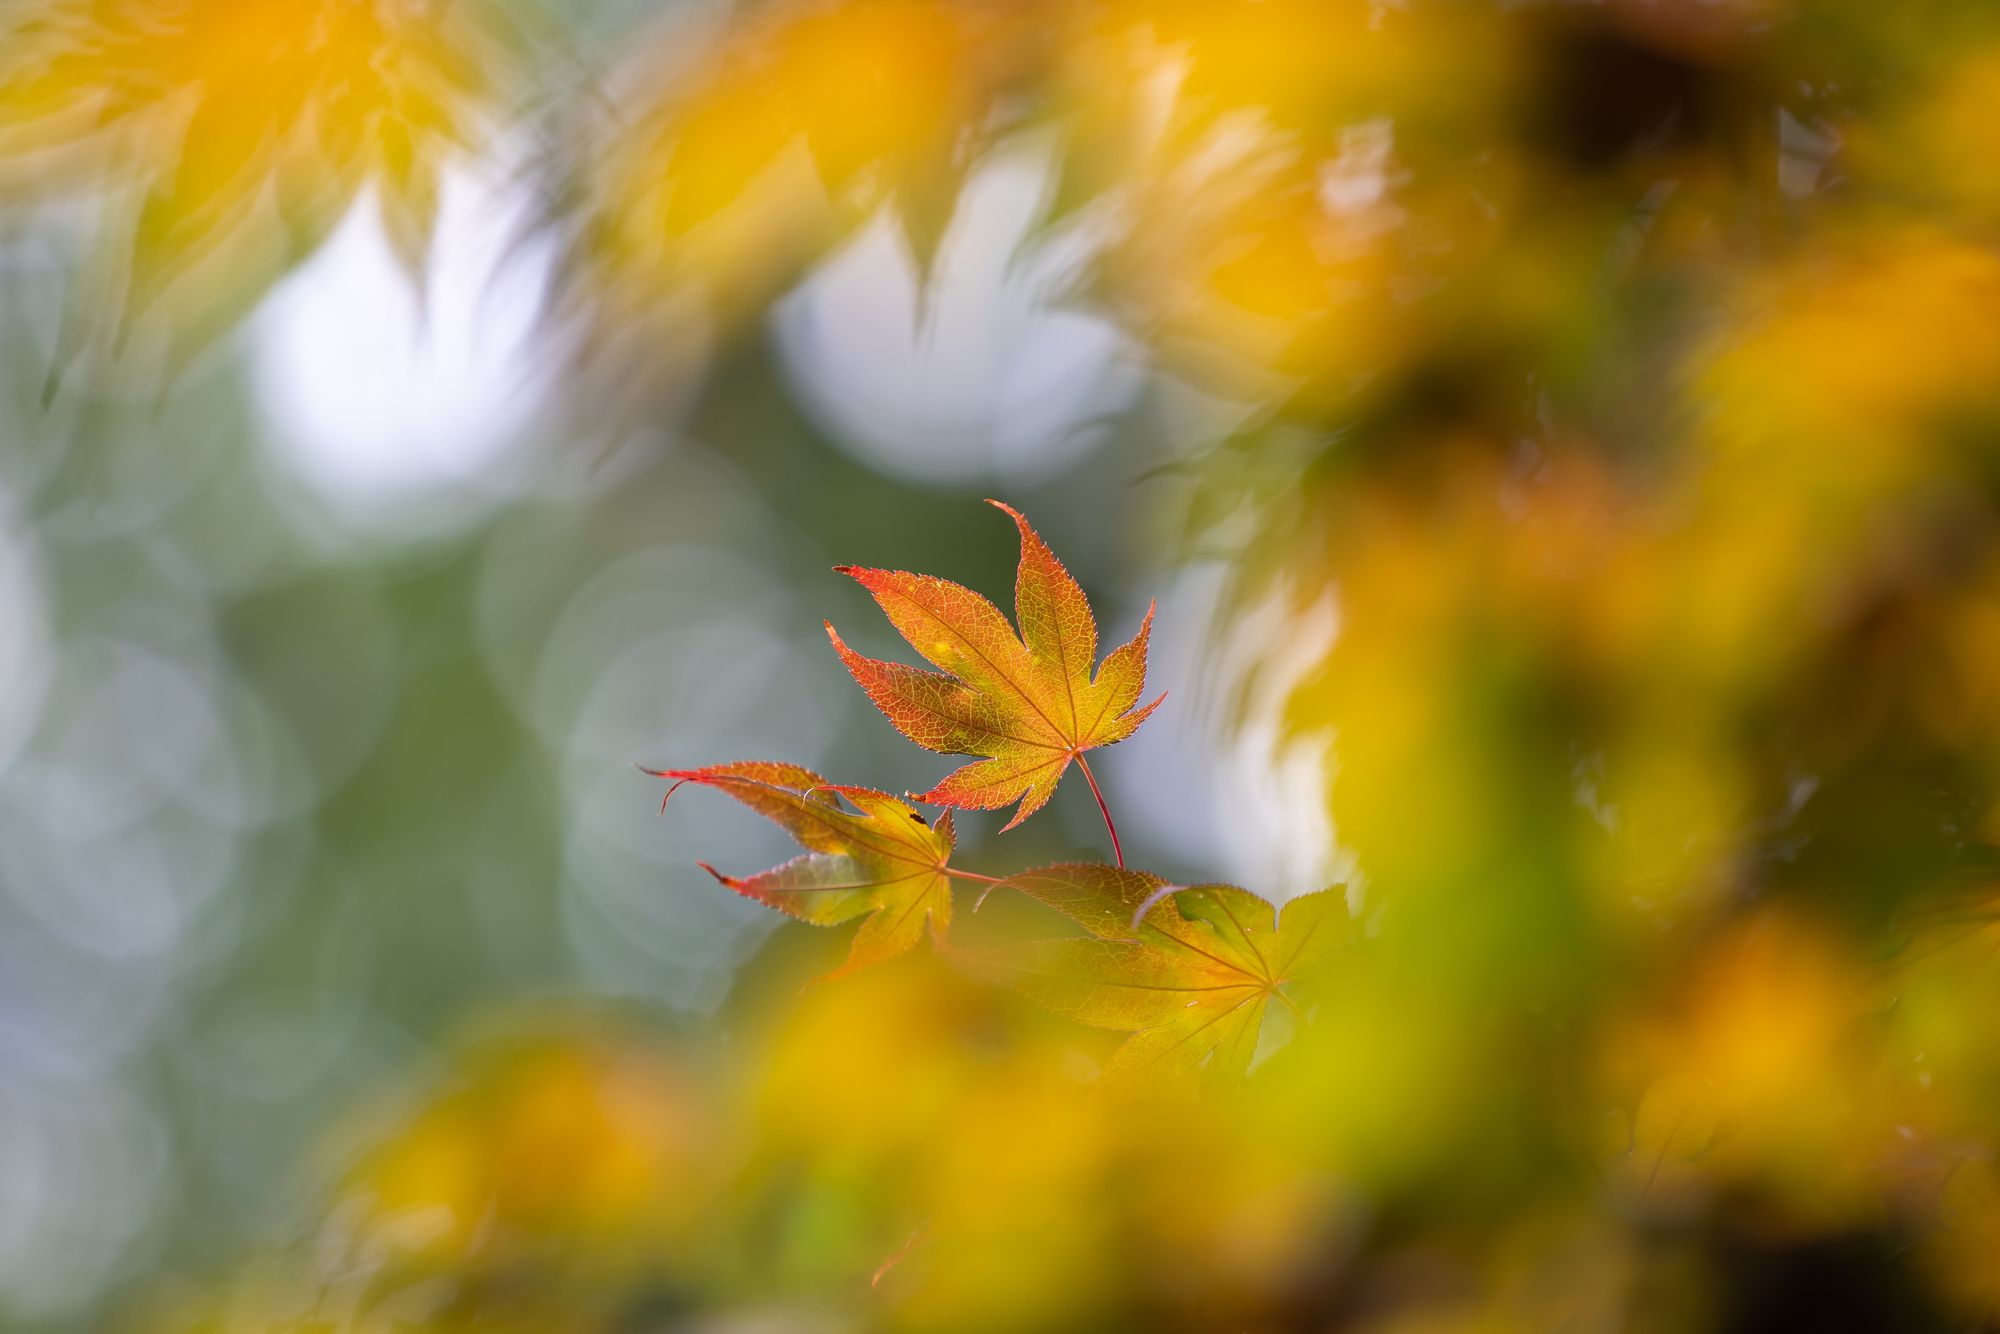 Yellow and orange maple leaves, with green leaves blurred out in the background and more yellow leaves blurred out in the foreground of the photo.